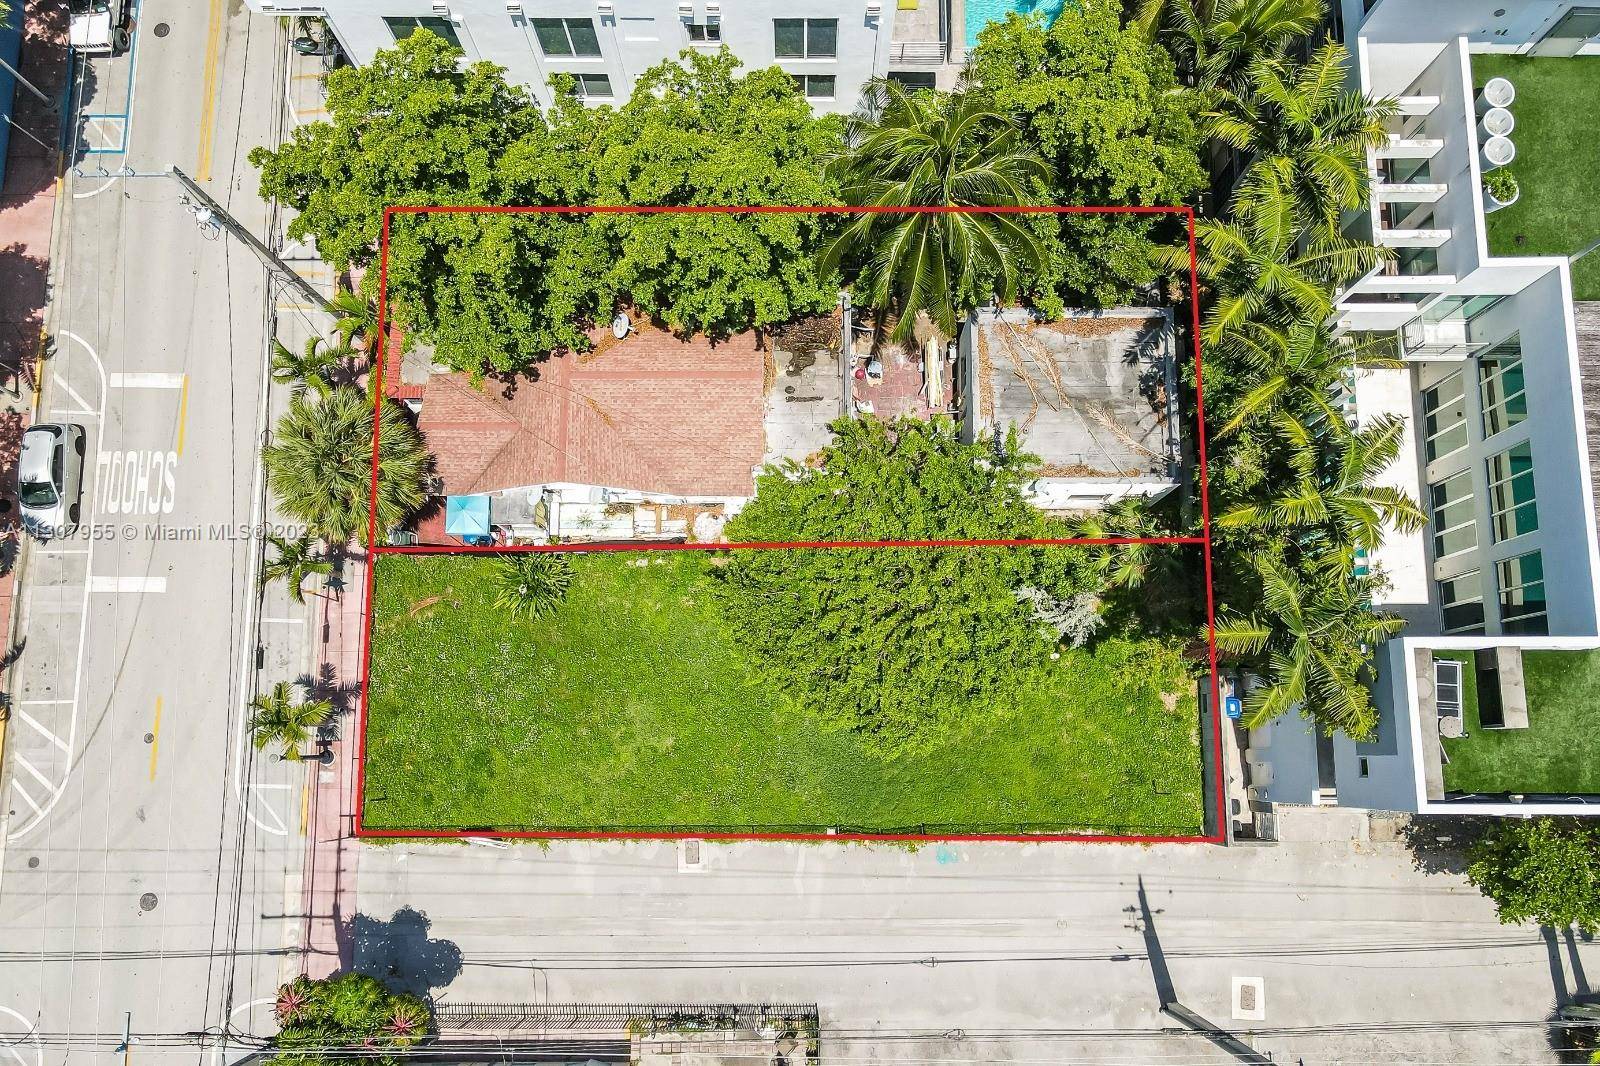 Very rare opportunity to find a double lot with alley access located in the desirable SoFi neighborhood South of Fifth South Beach.